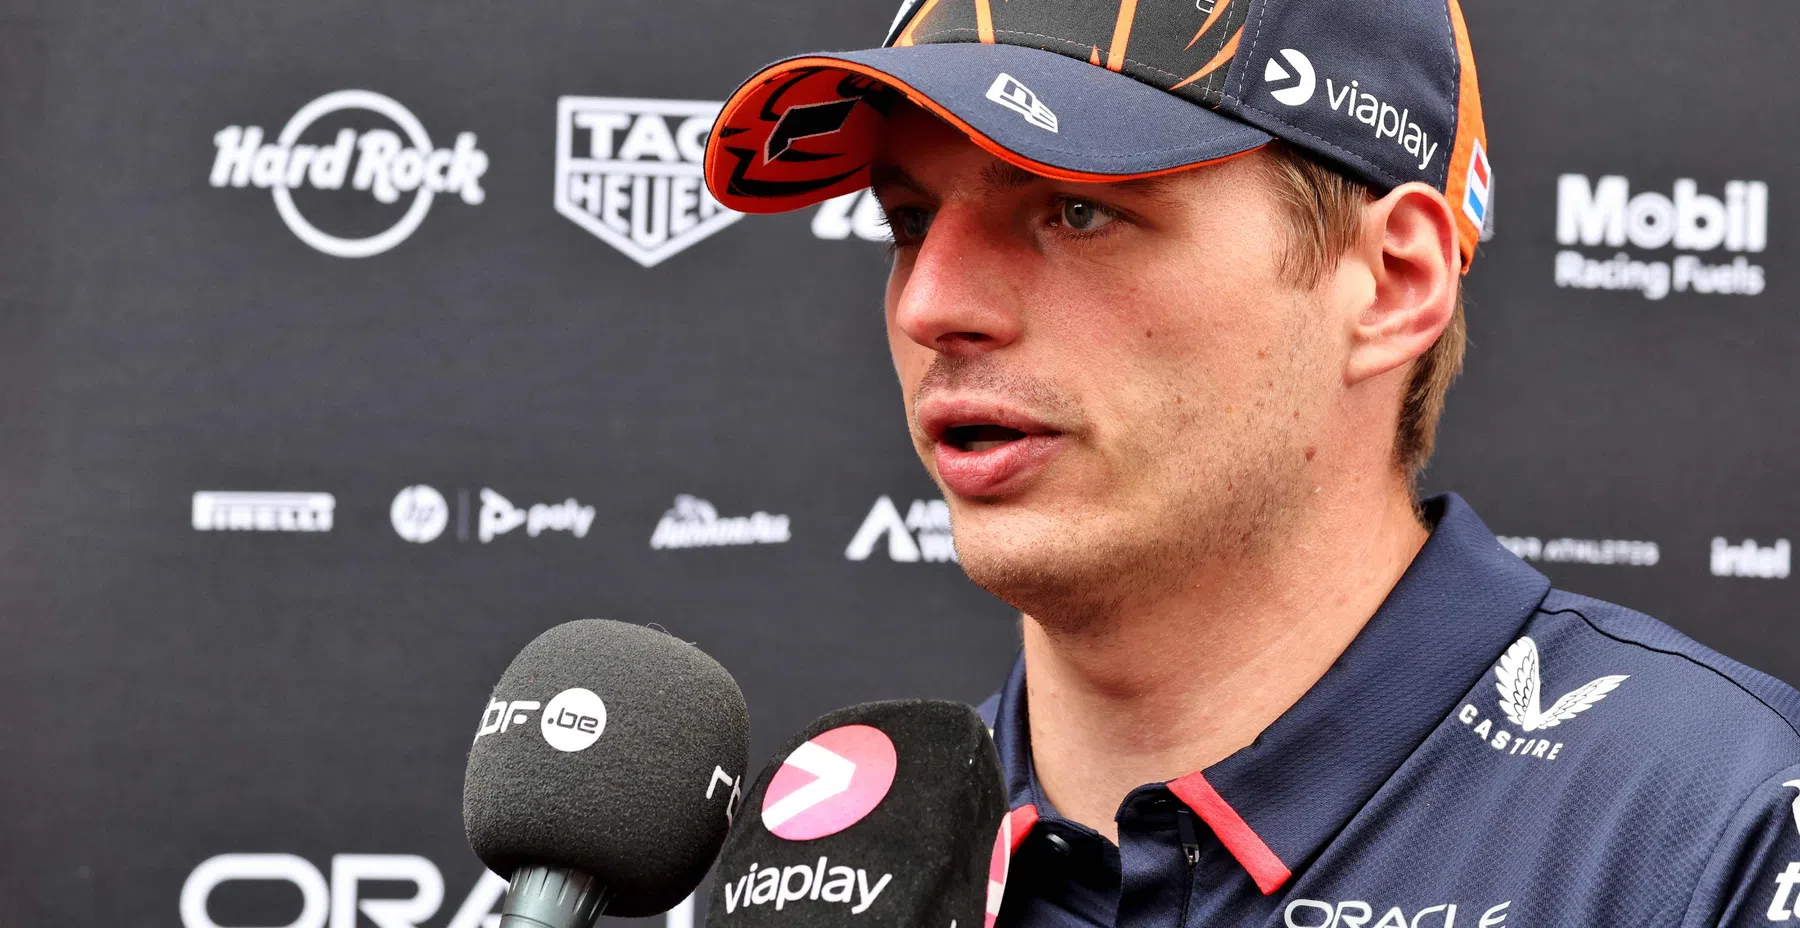 Stewards judge Verstappen late at press conference